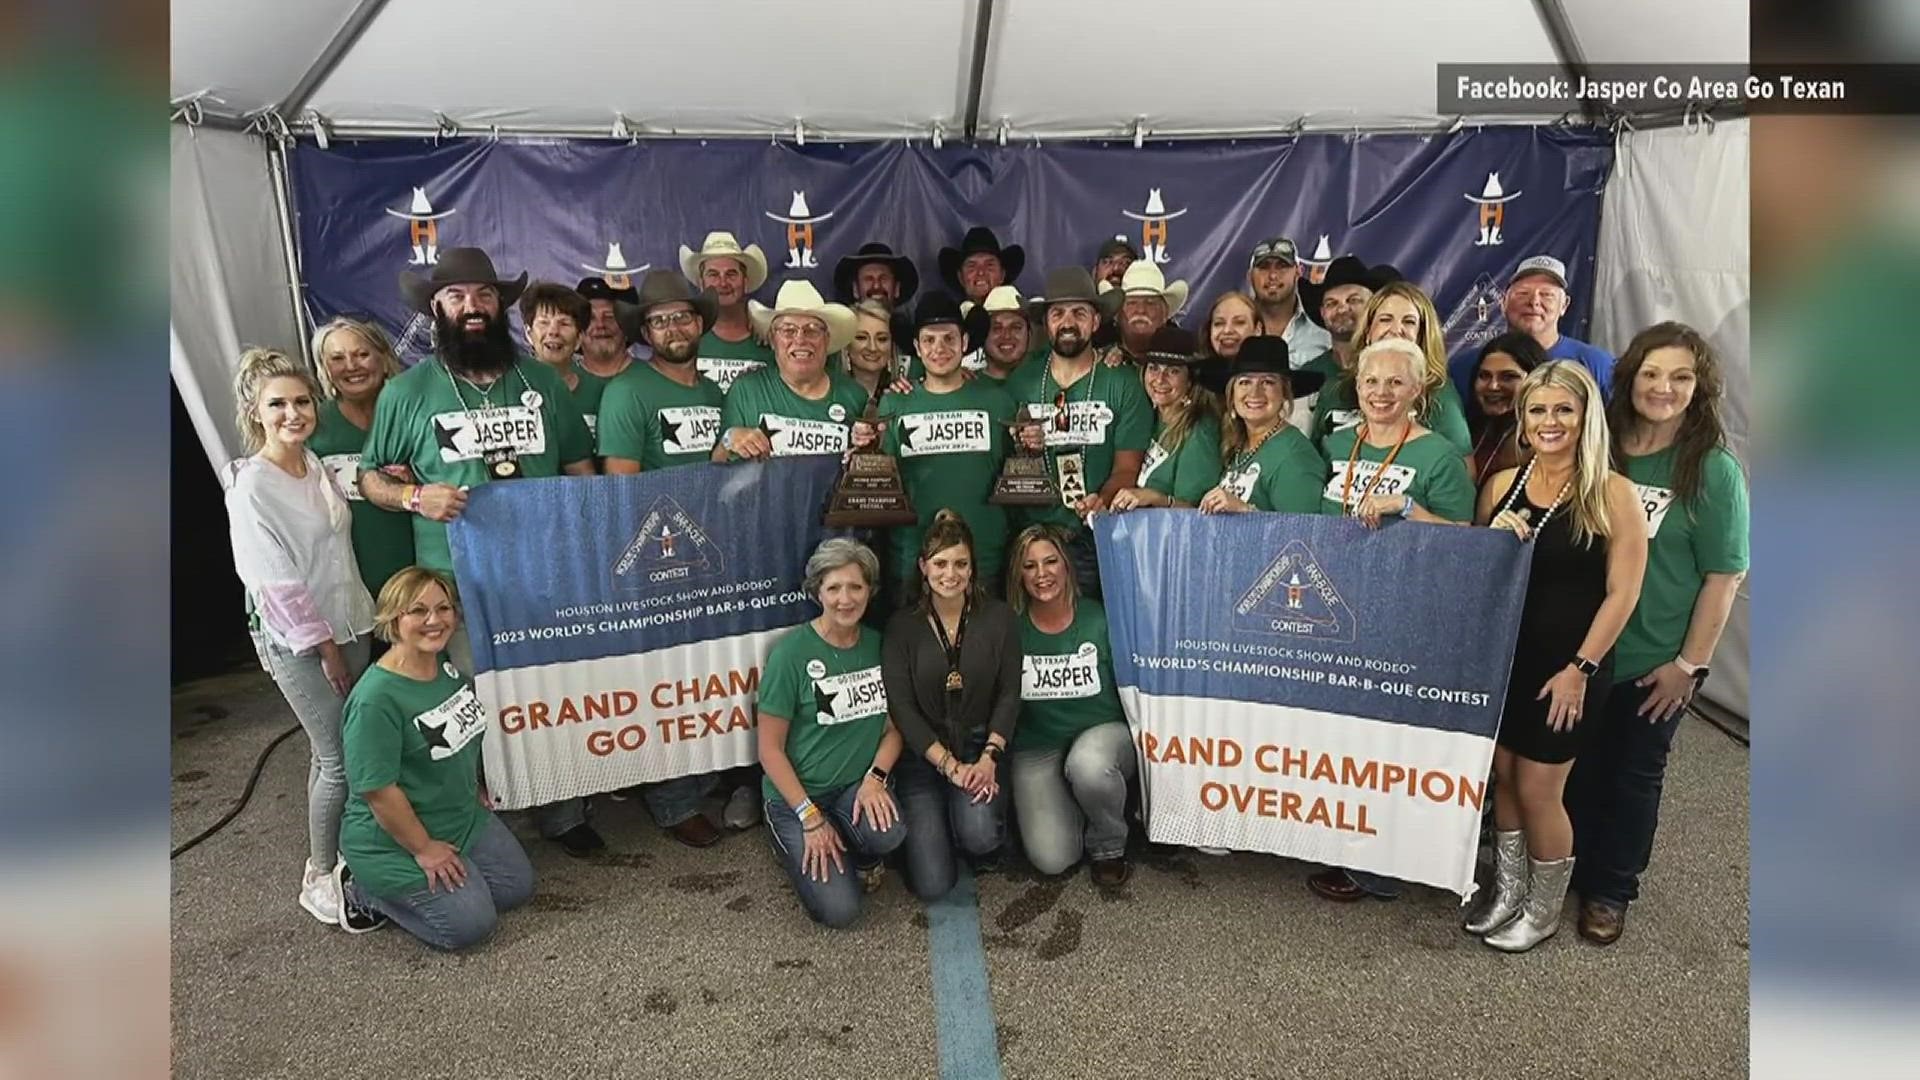 This year's Grand Overall Champion of the 2023 World's Championship Bar-B-Que was Jasper County Go Texan.